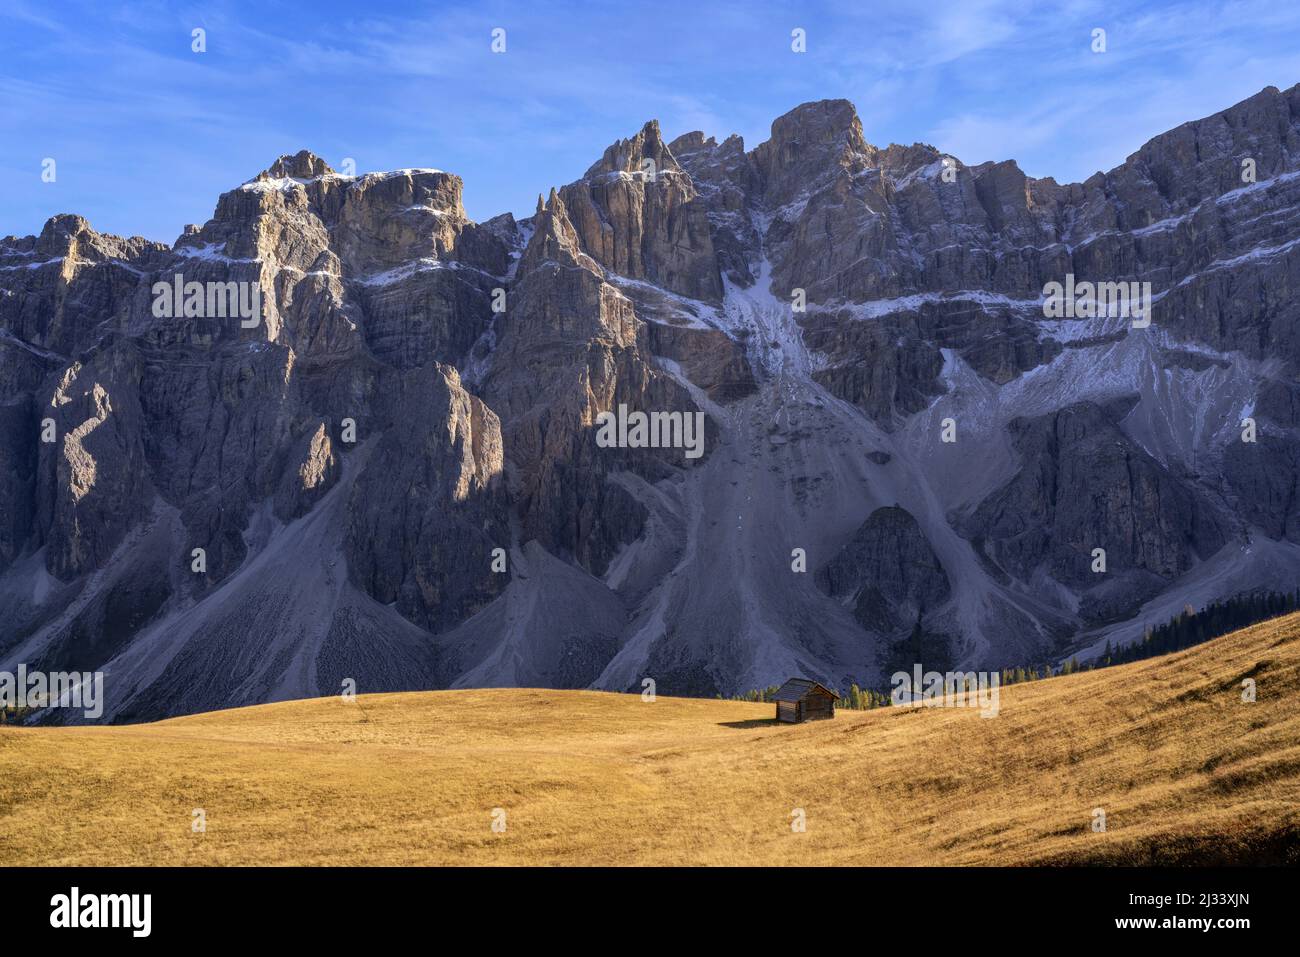 Small hut in front of the Geisler Group, Puez-Geisler, Lungiarü, Dolomites, Italy, Europe Stock Photo